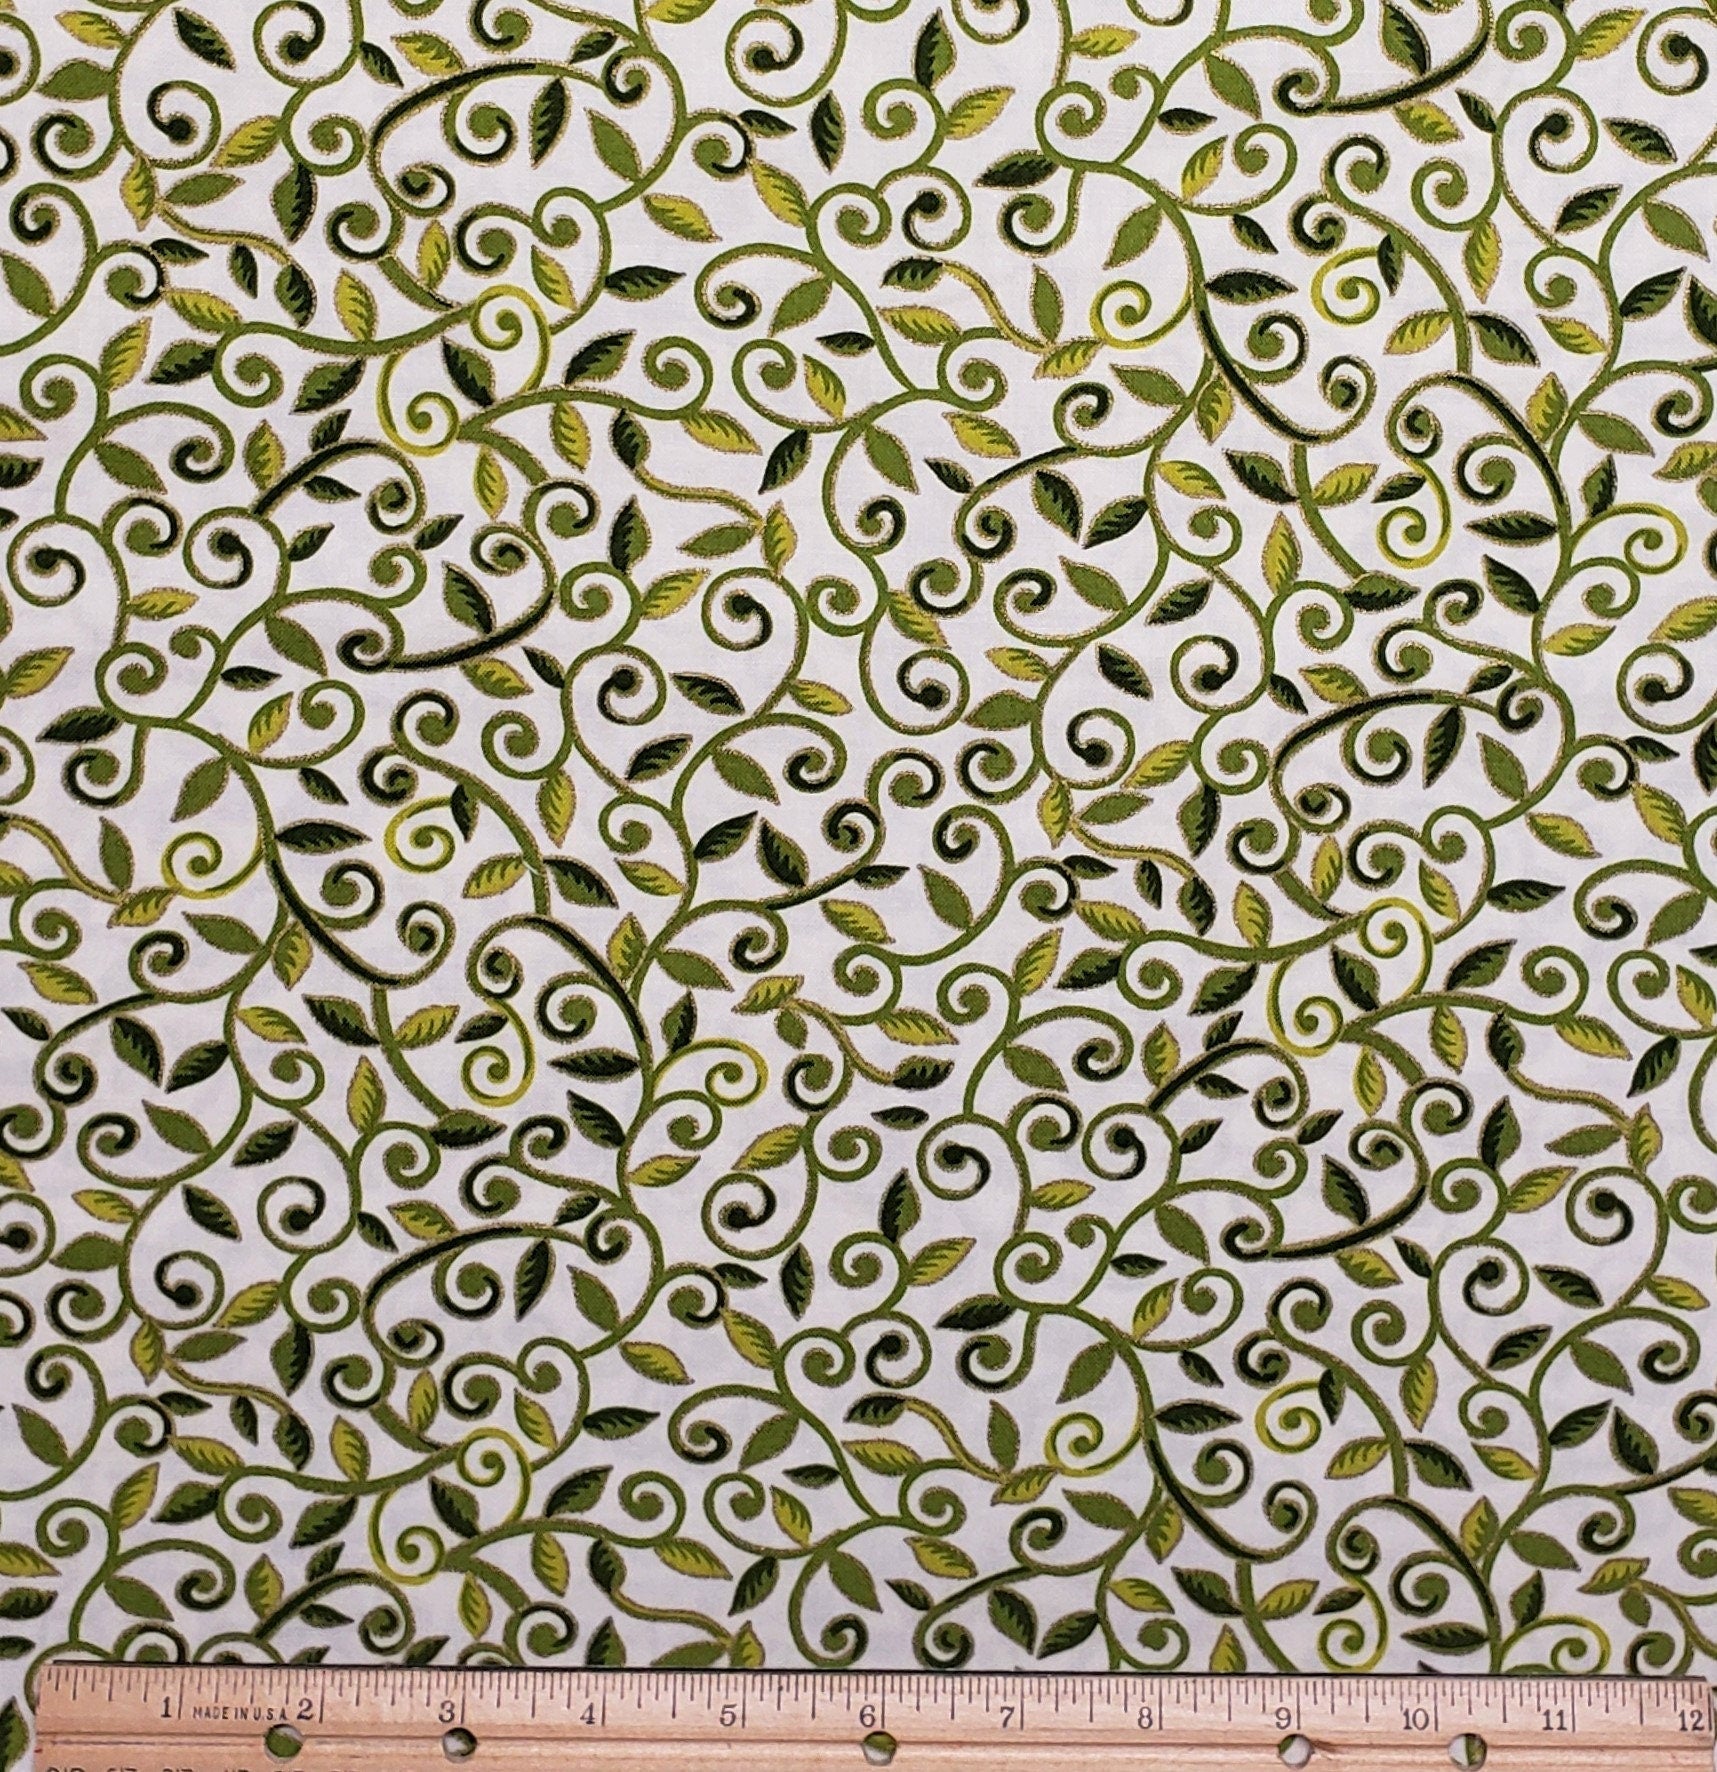 2 yards make-up themed cotton fabric-JoAnn fabrics-crafts/ quilting/accessories 